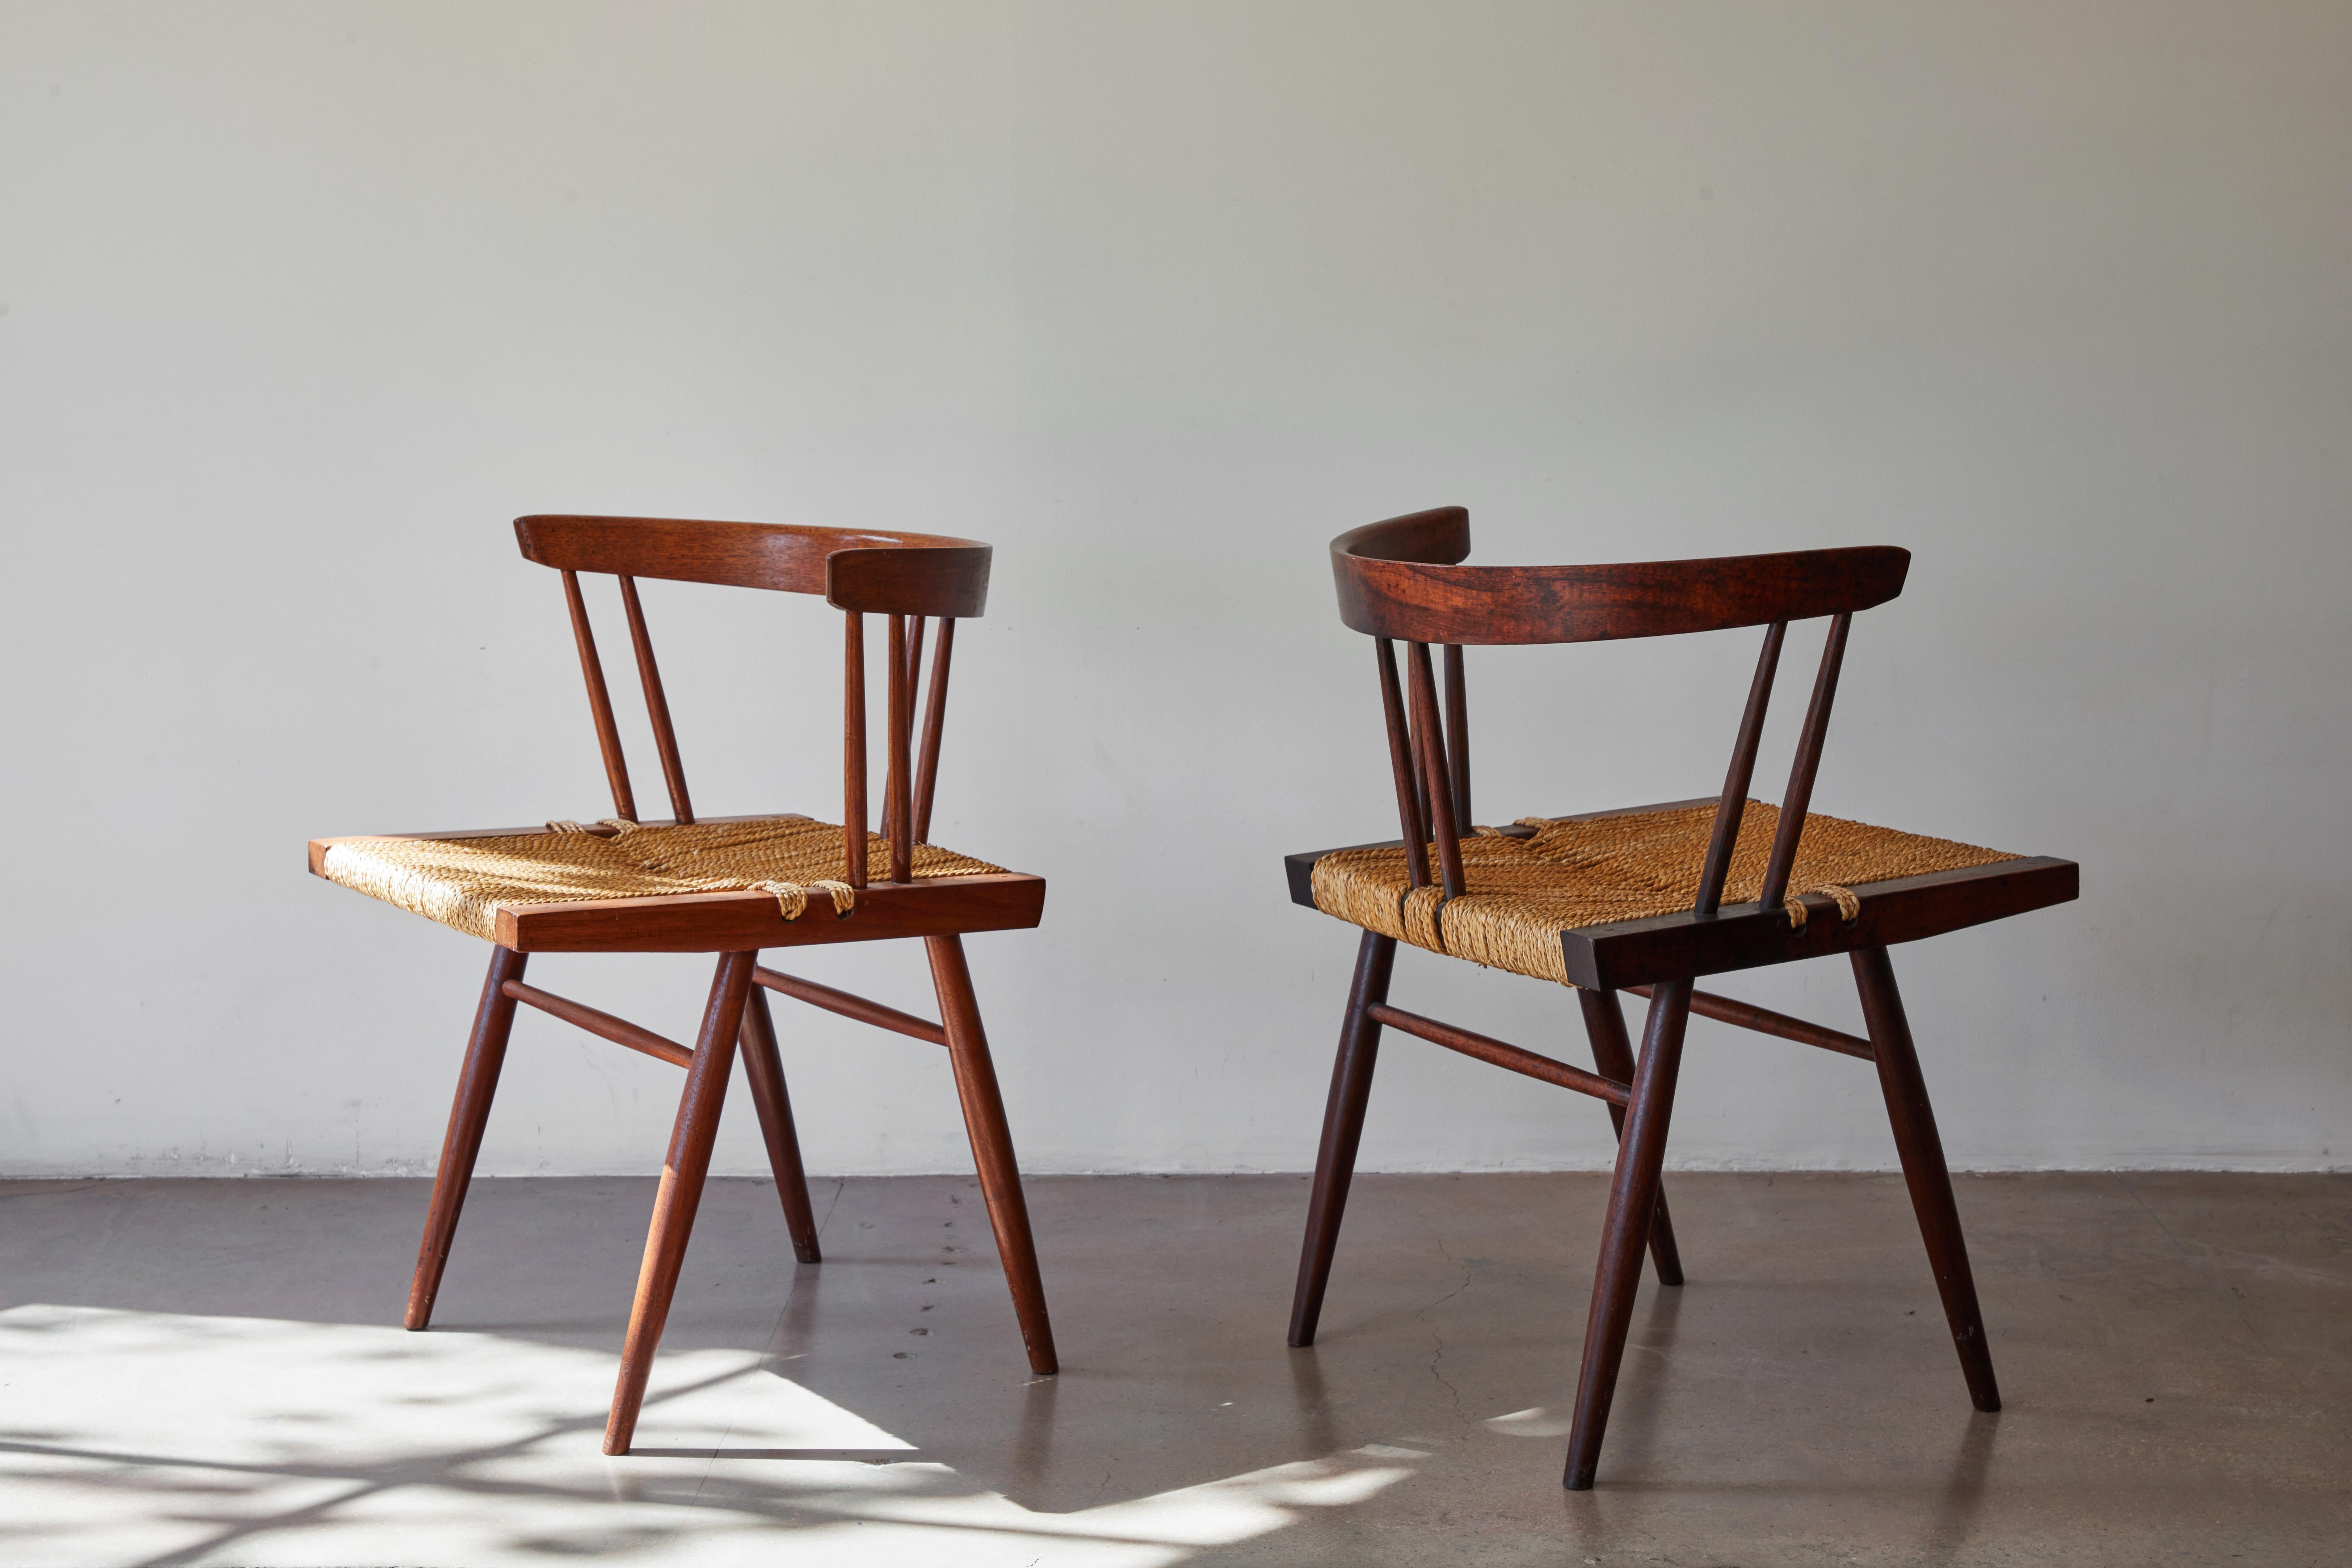 American Set of Six Grass Seated Chairs by George Nakashima